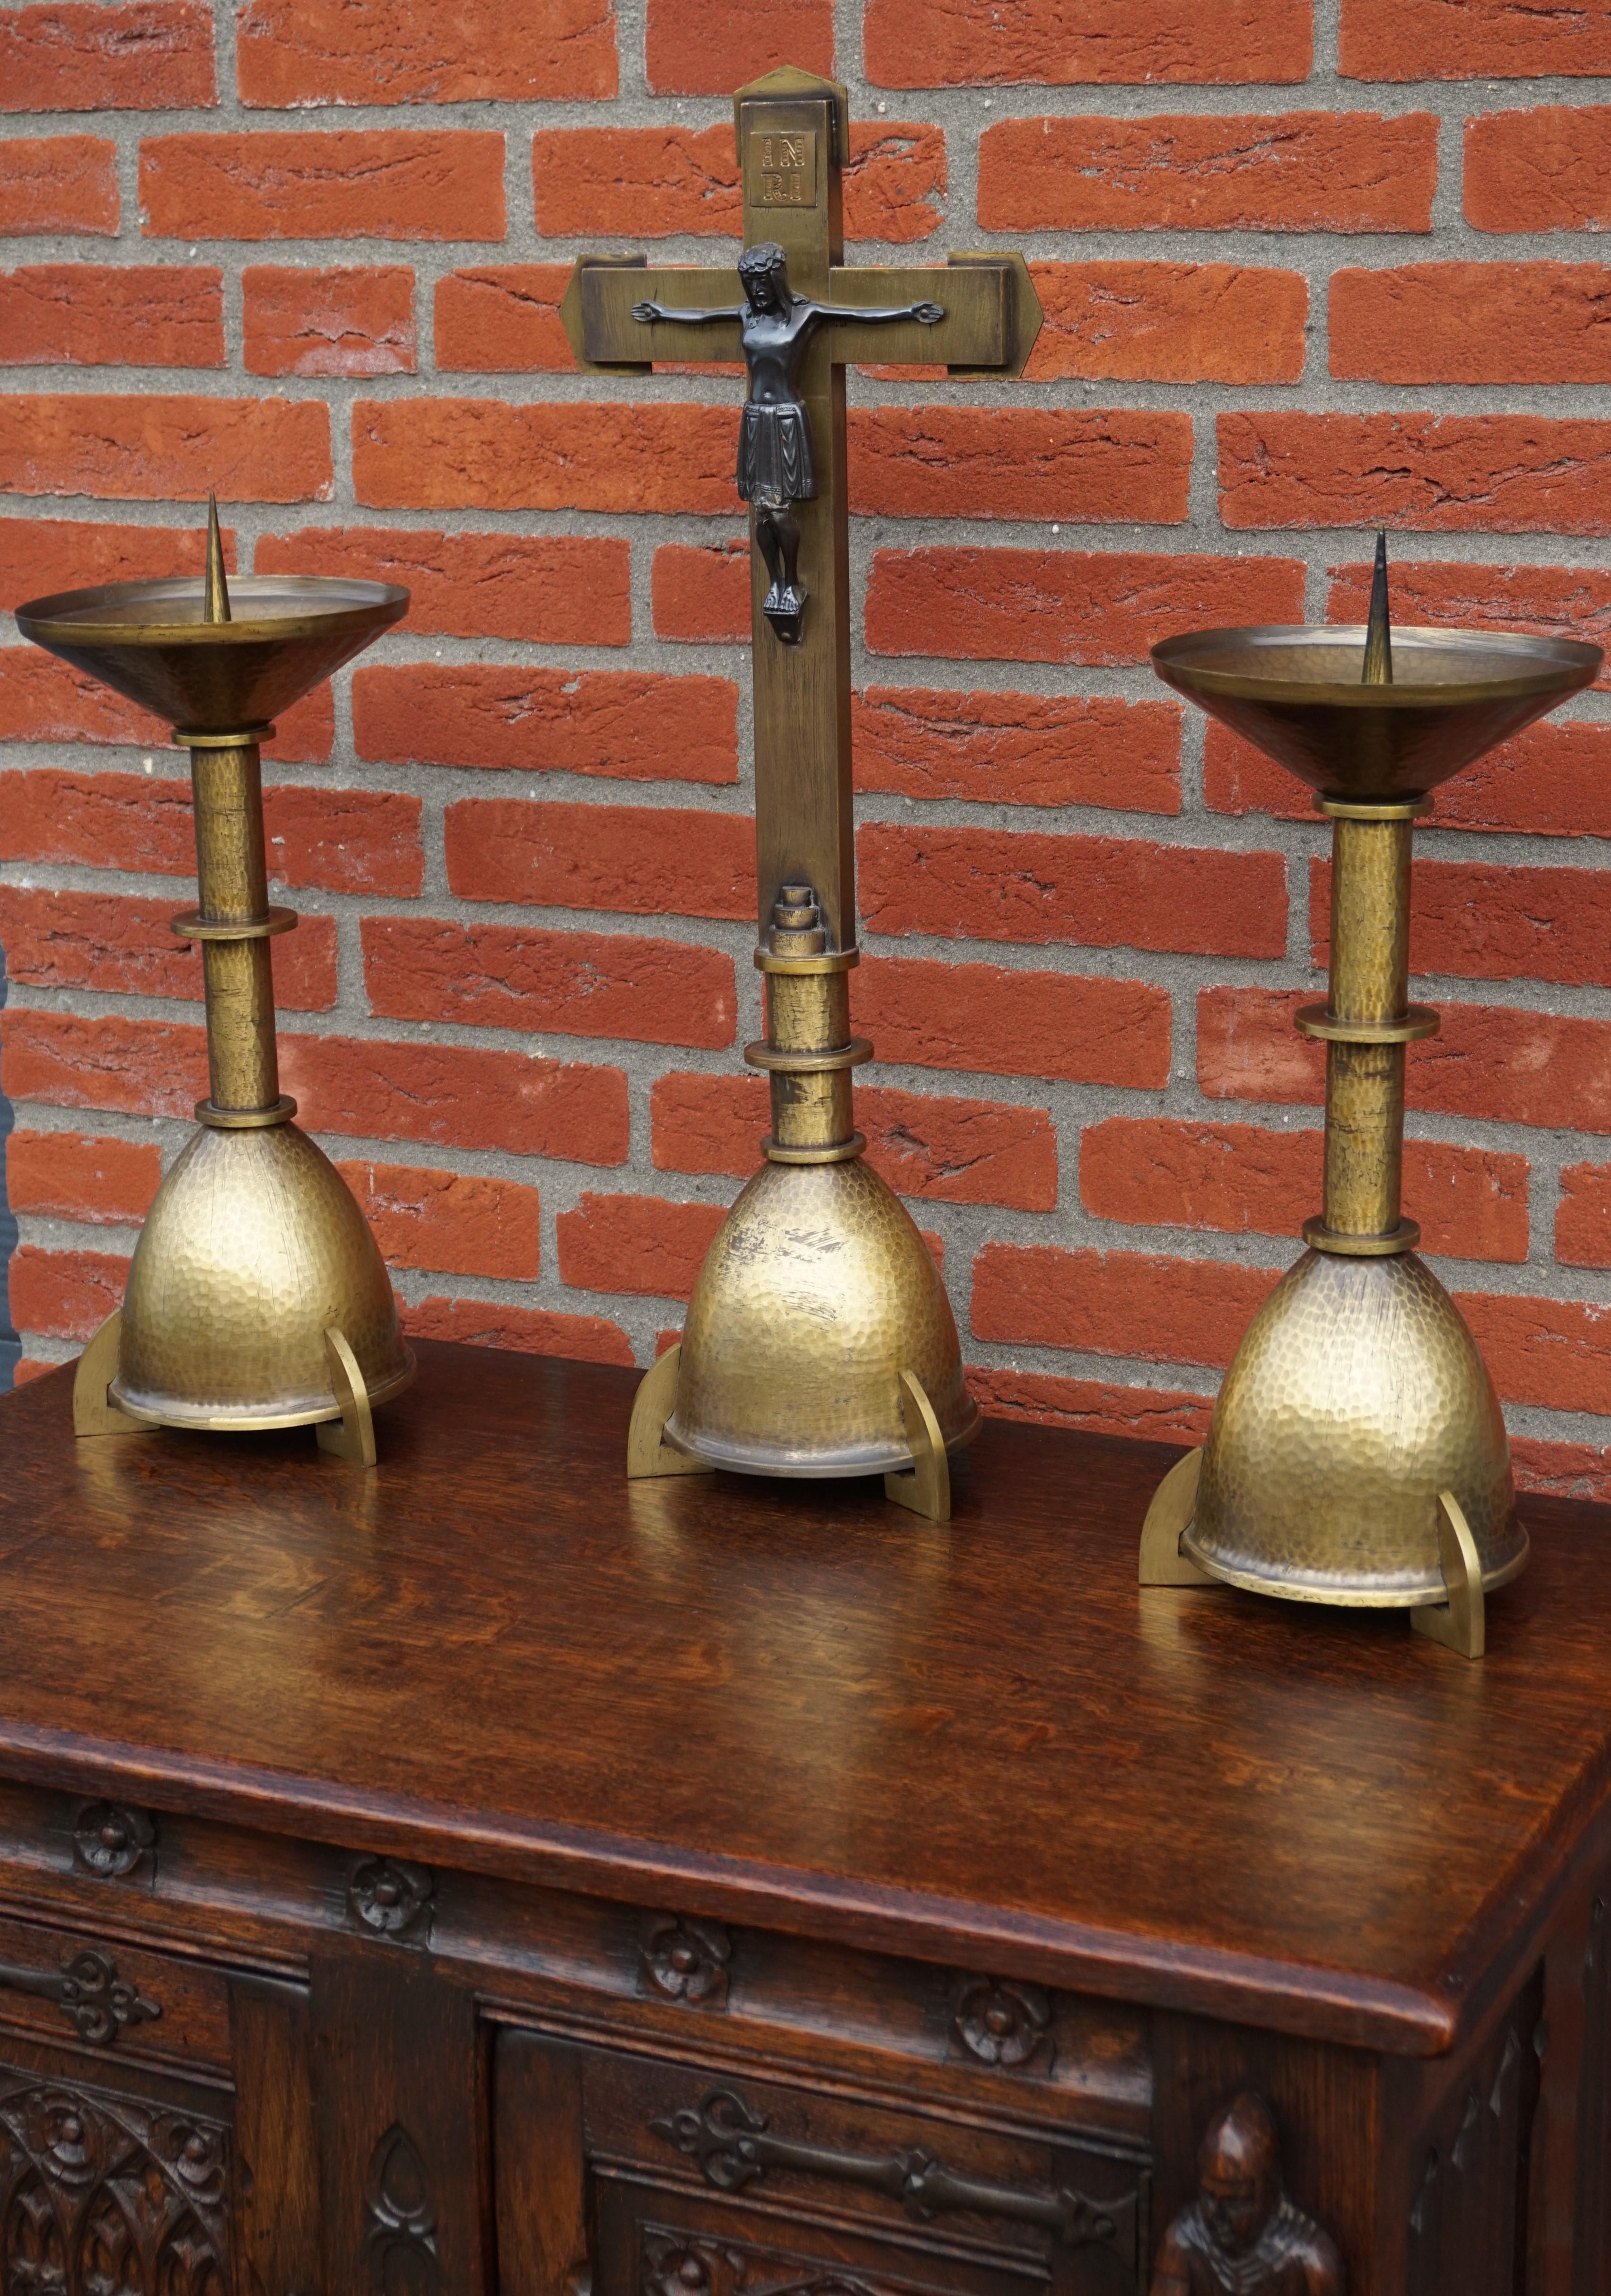 Stylish antique brass altar set with a bronzed corpus of Christ.

This beautifully designed AND very well executed, medieval style altar set is all handcrafted in the European Arts and Crafts era. The perfectly identical and very aesthetically